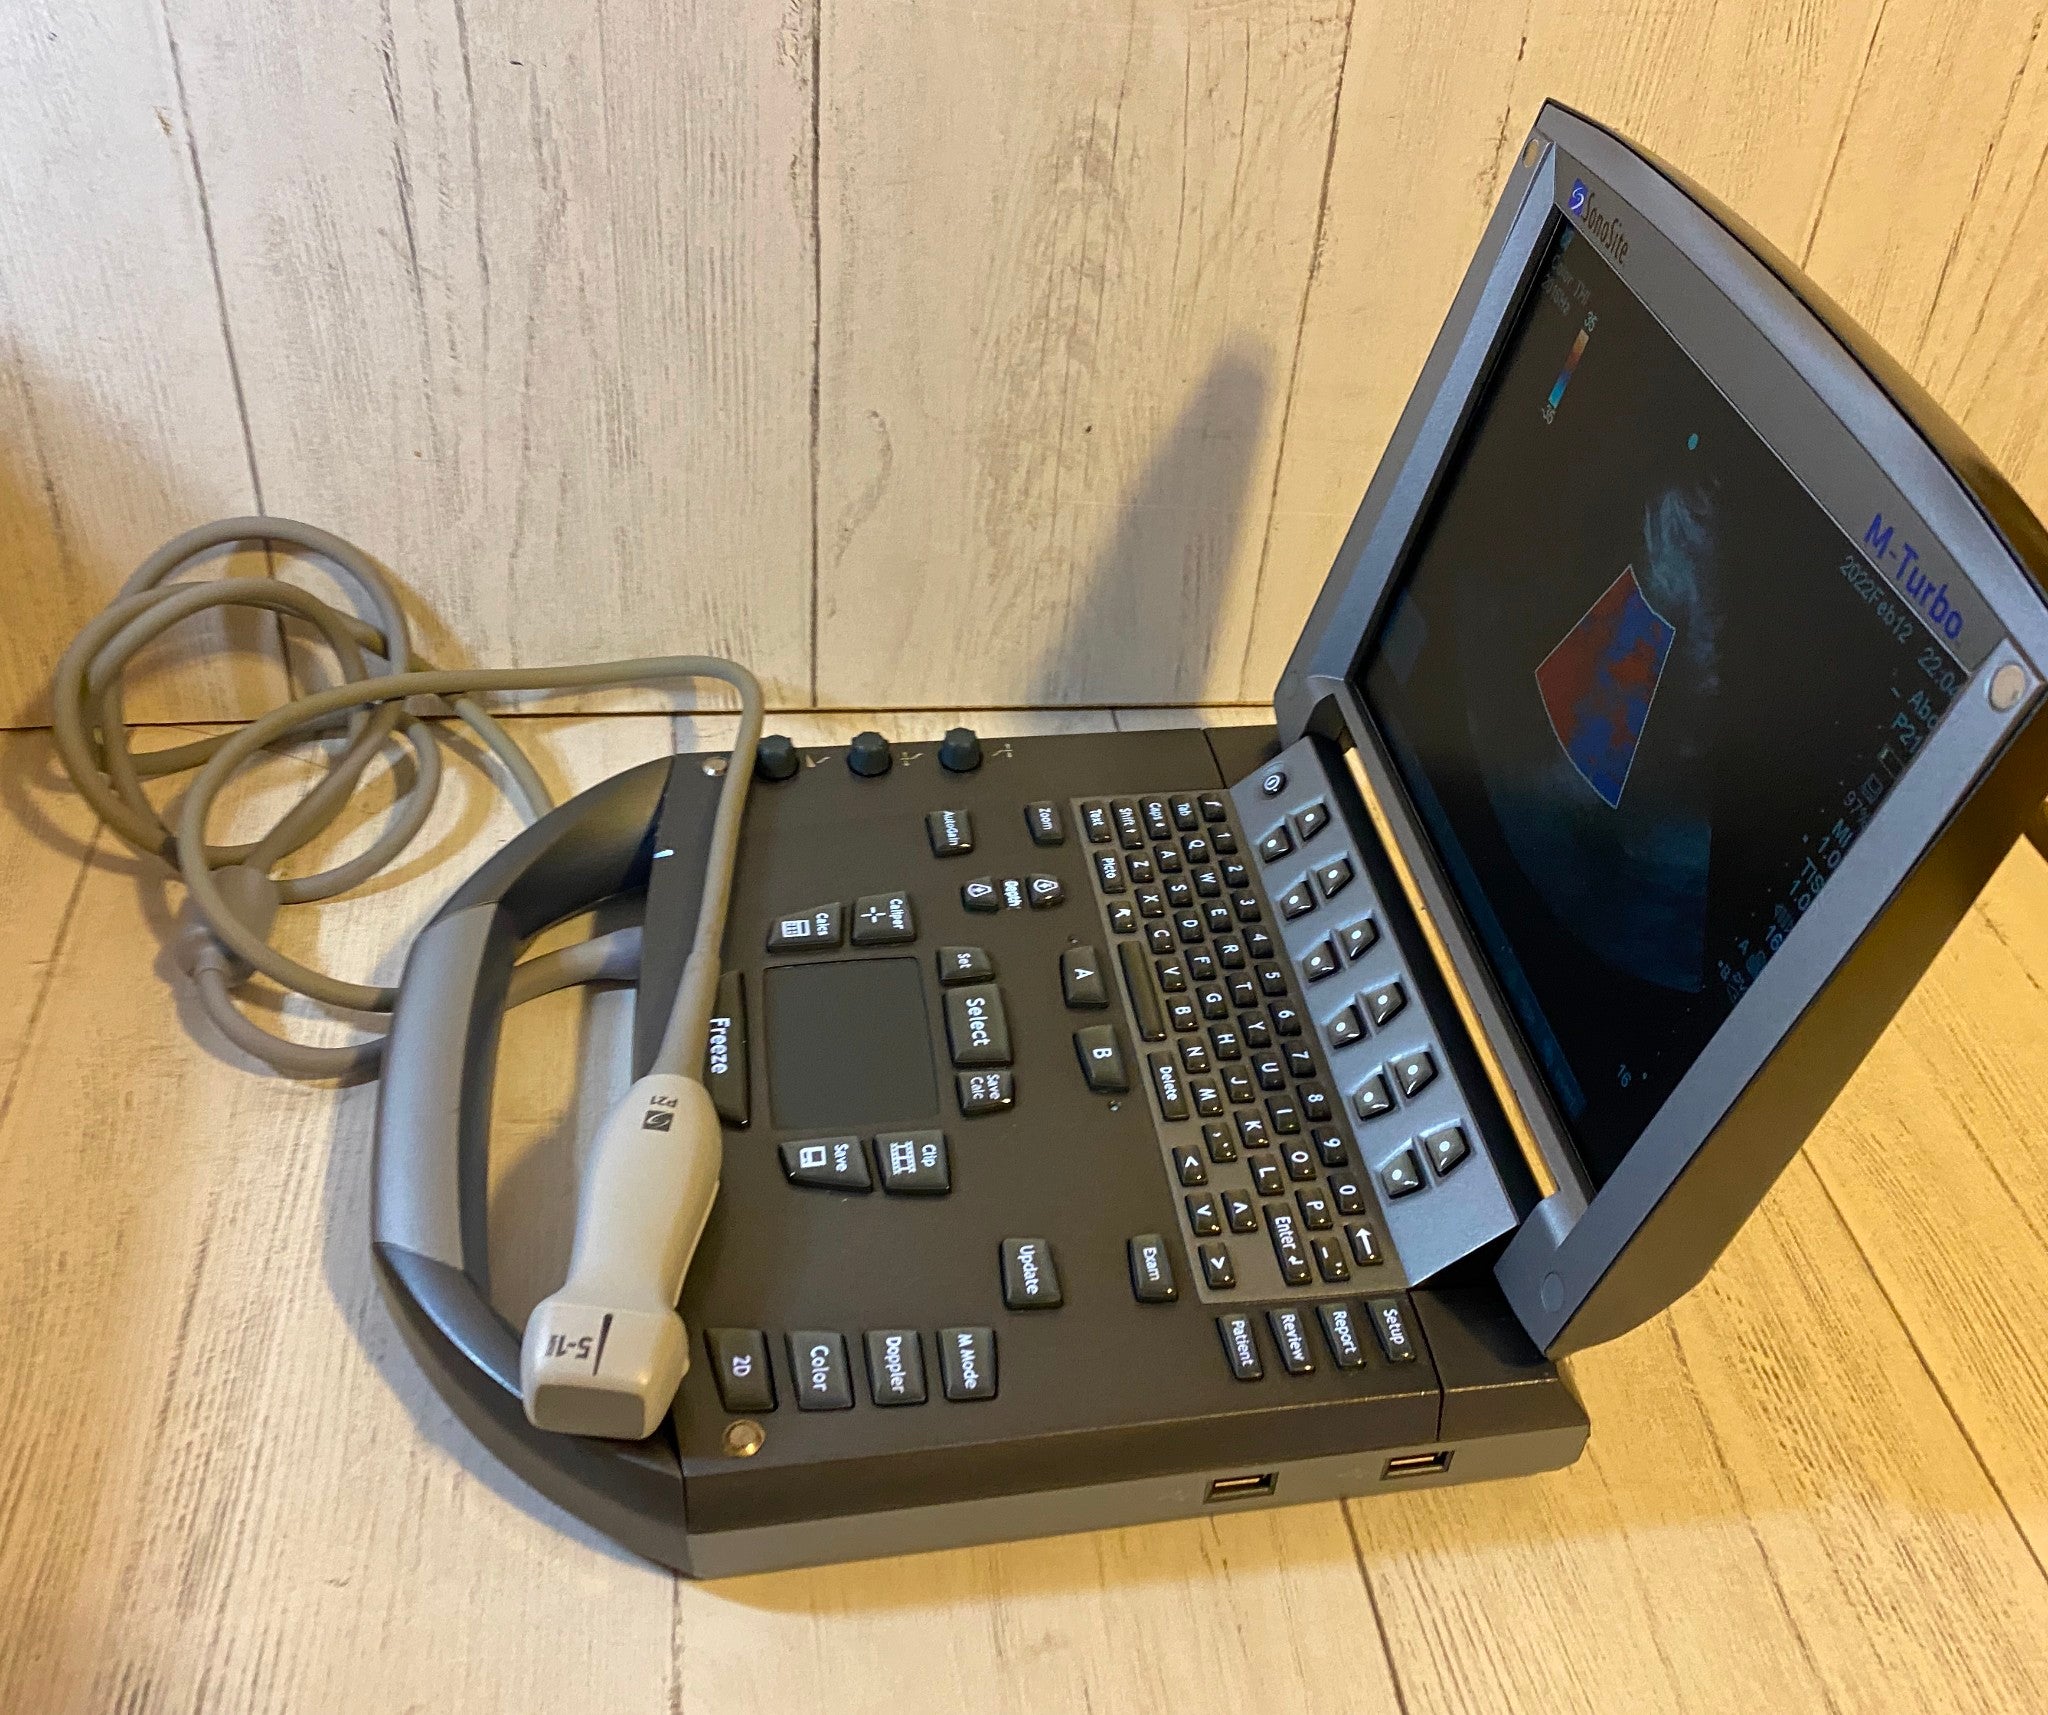 Sonosite M-Turbo Portable Ultrasound 2010 with Phased Array Probe P21 DIAGNOSTIC ULTRASOUND MACHINES FOR SALE